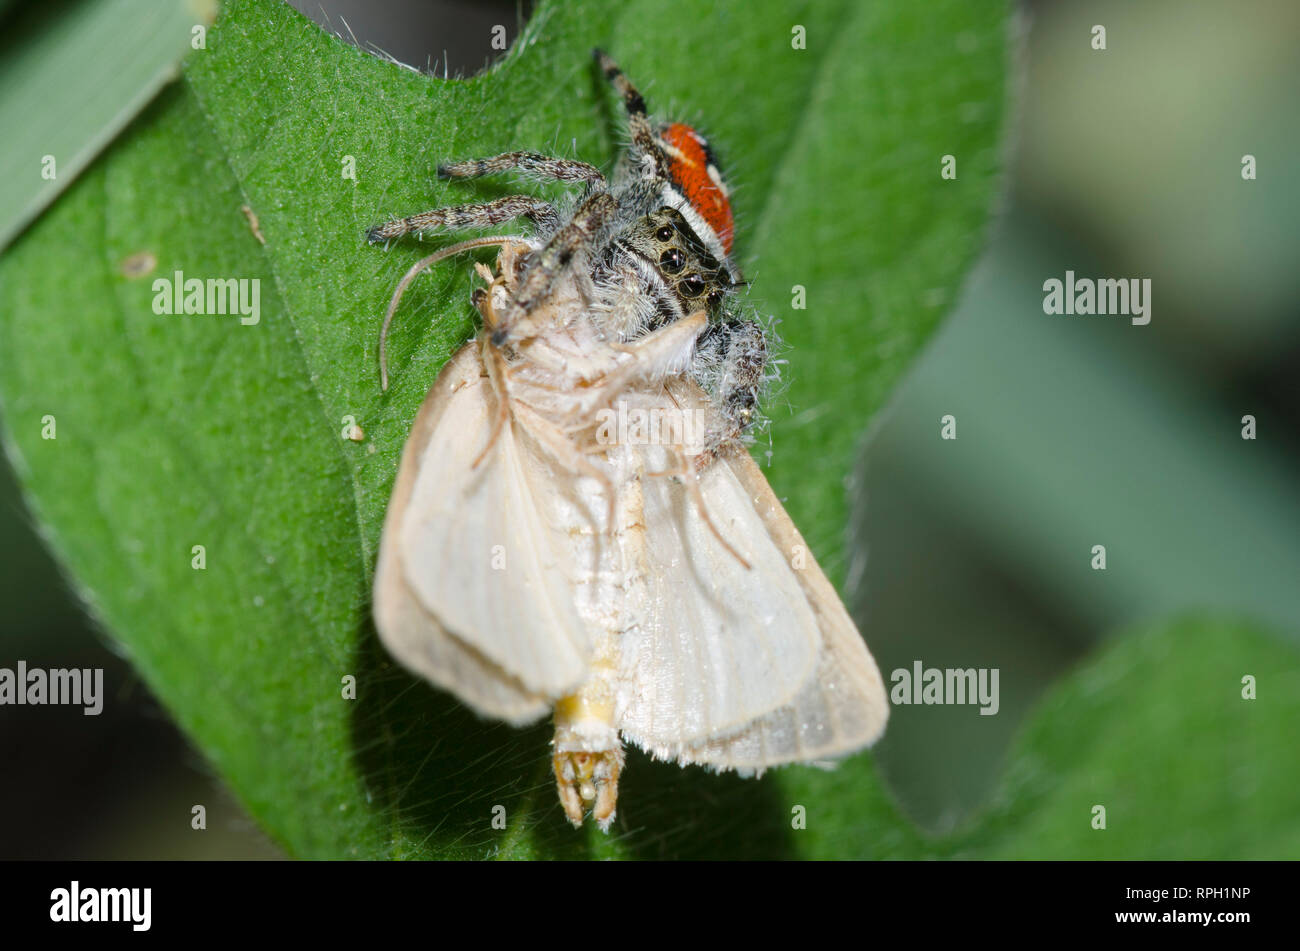 Jumping Spider, Phidippus sp., with moth, Order Lepidoptera, prey Stock Photo